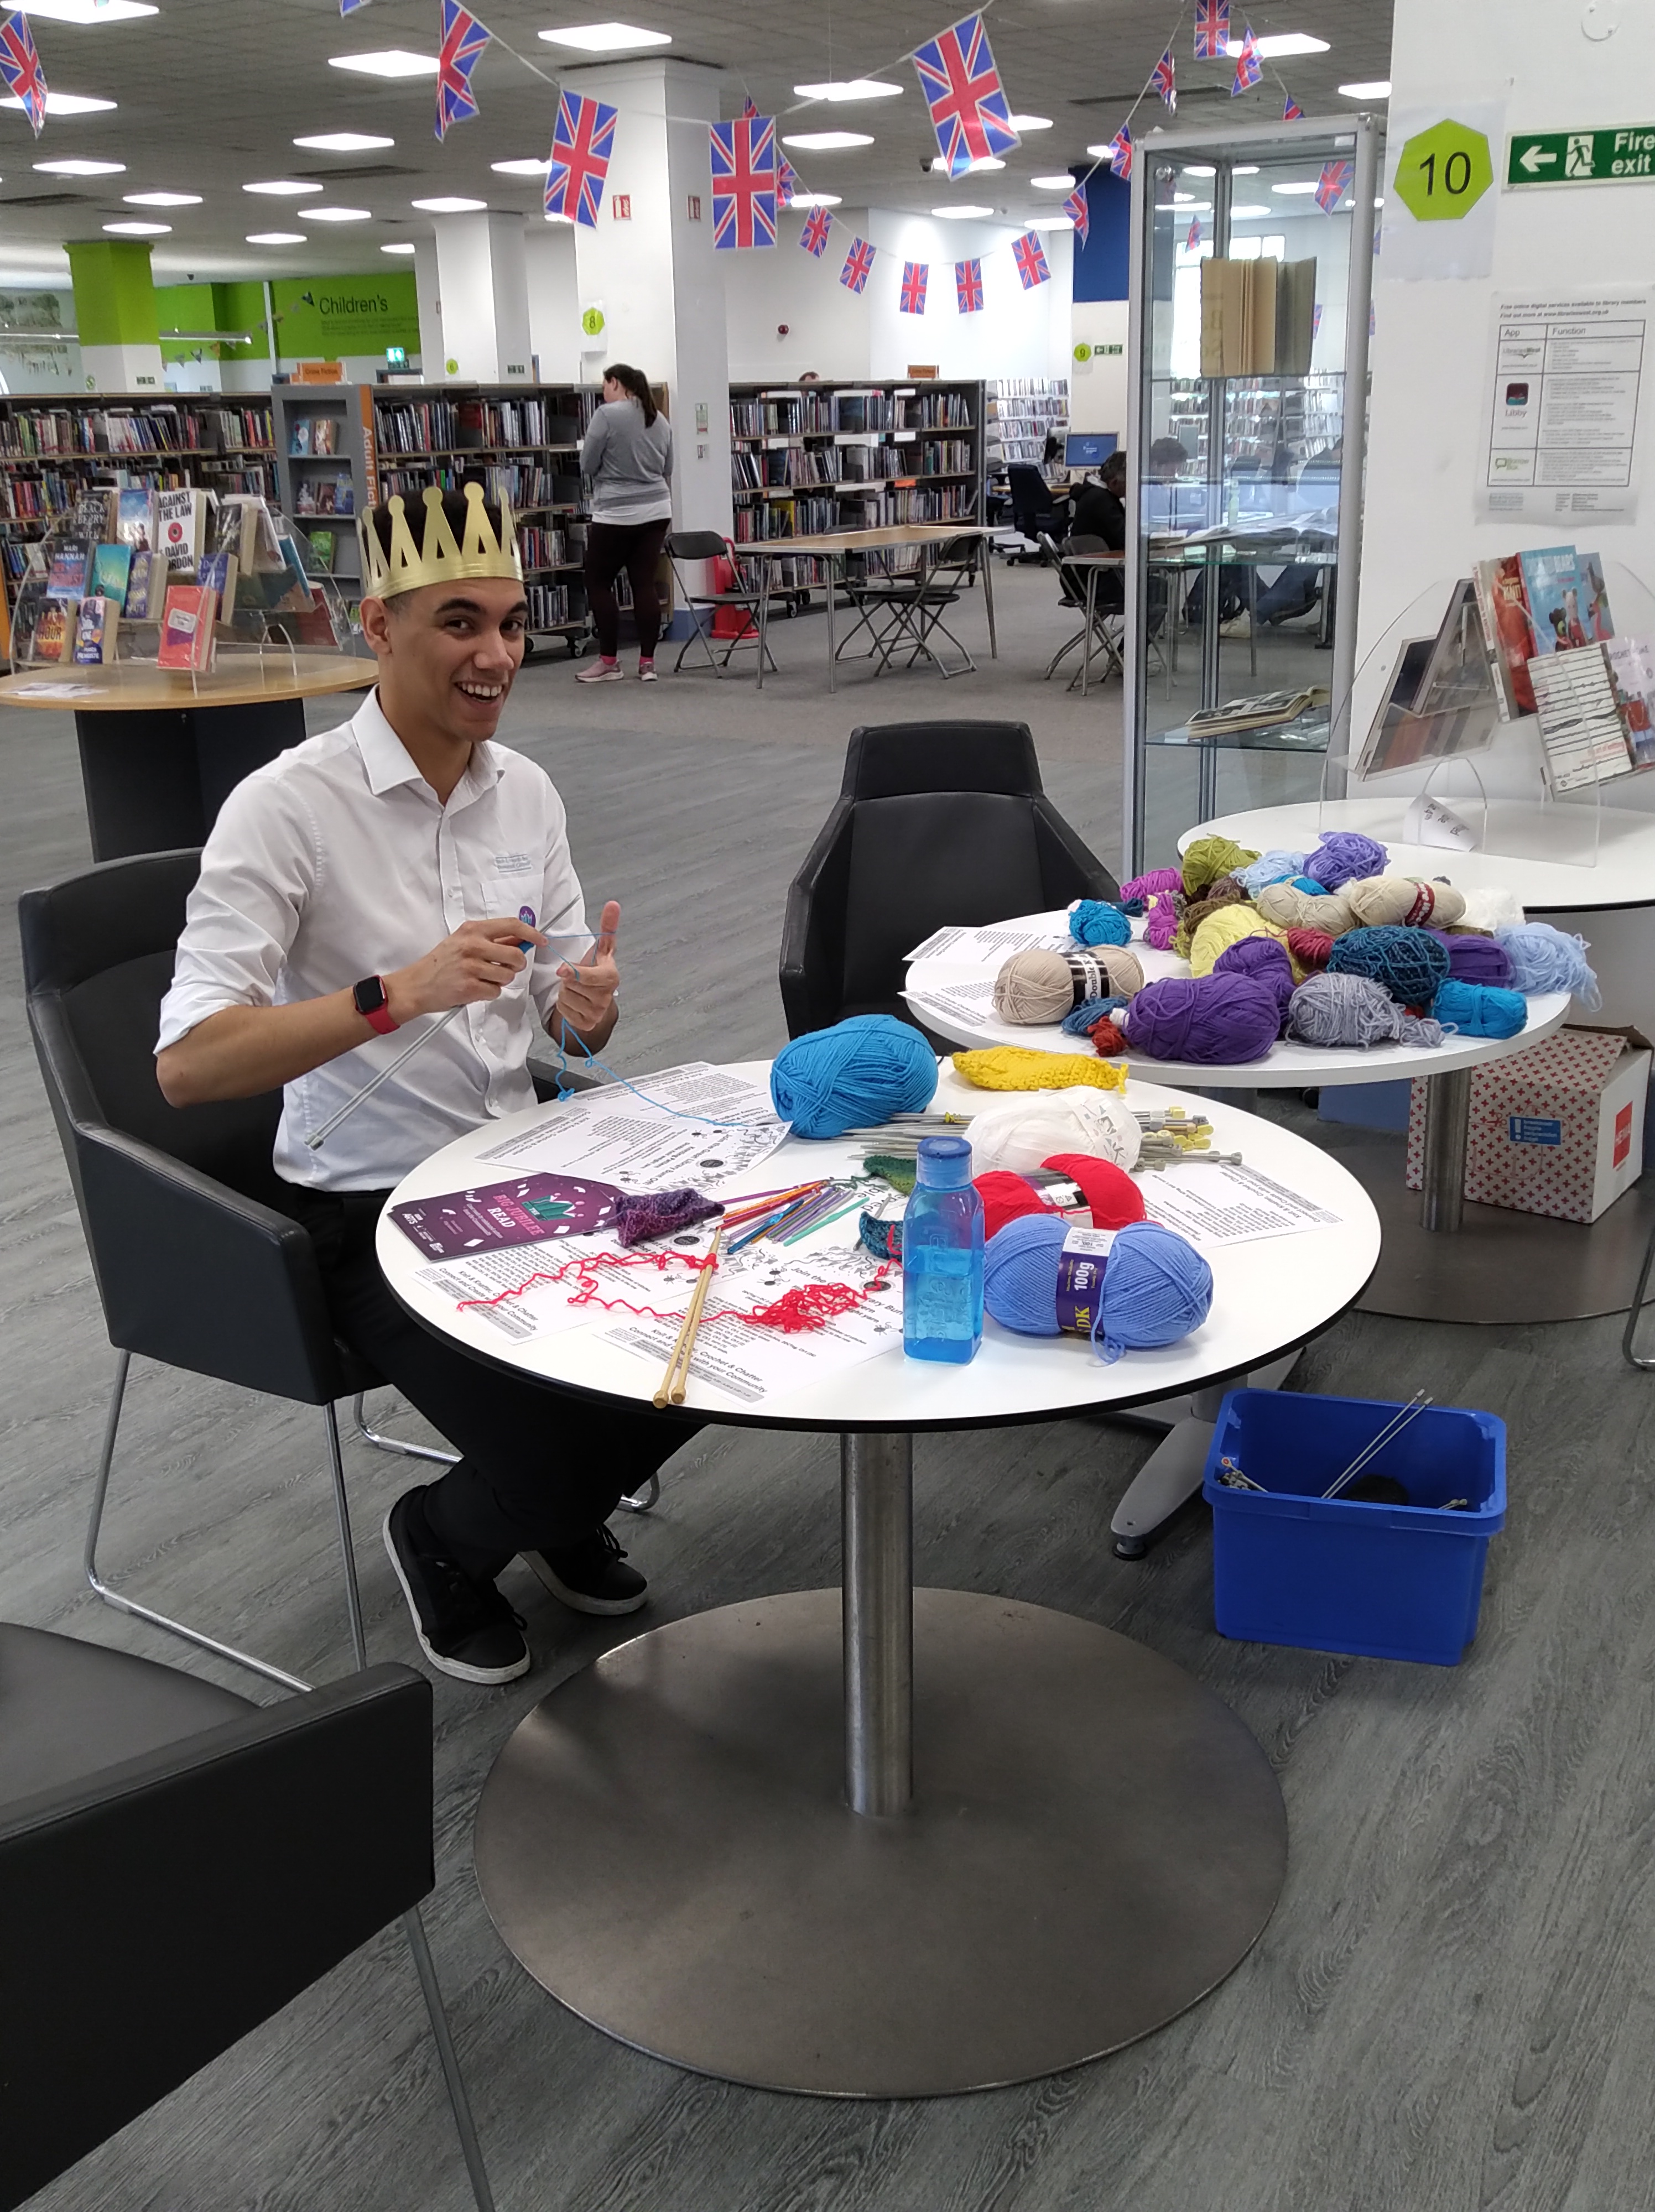 Smiling young man knitting in staff uniform sat at one of two tables with piles of yarn, knitting needles and pieces of paper